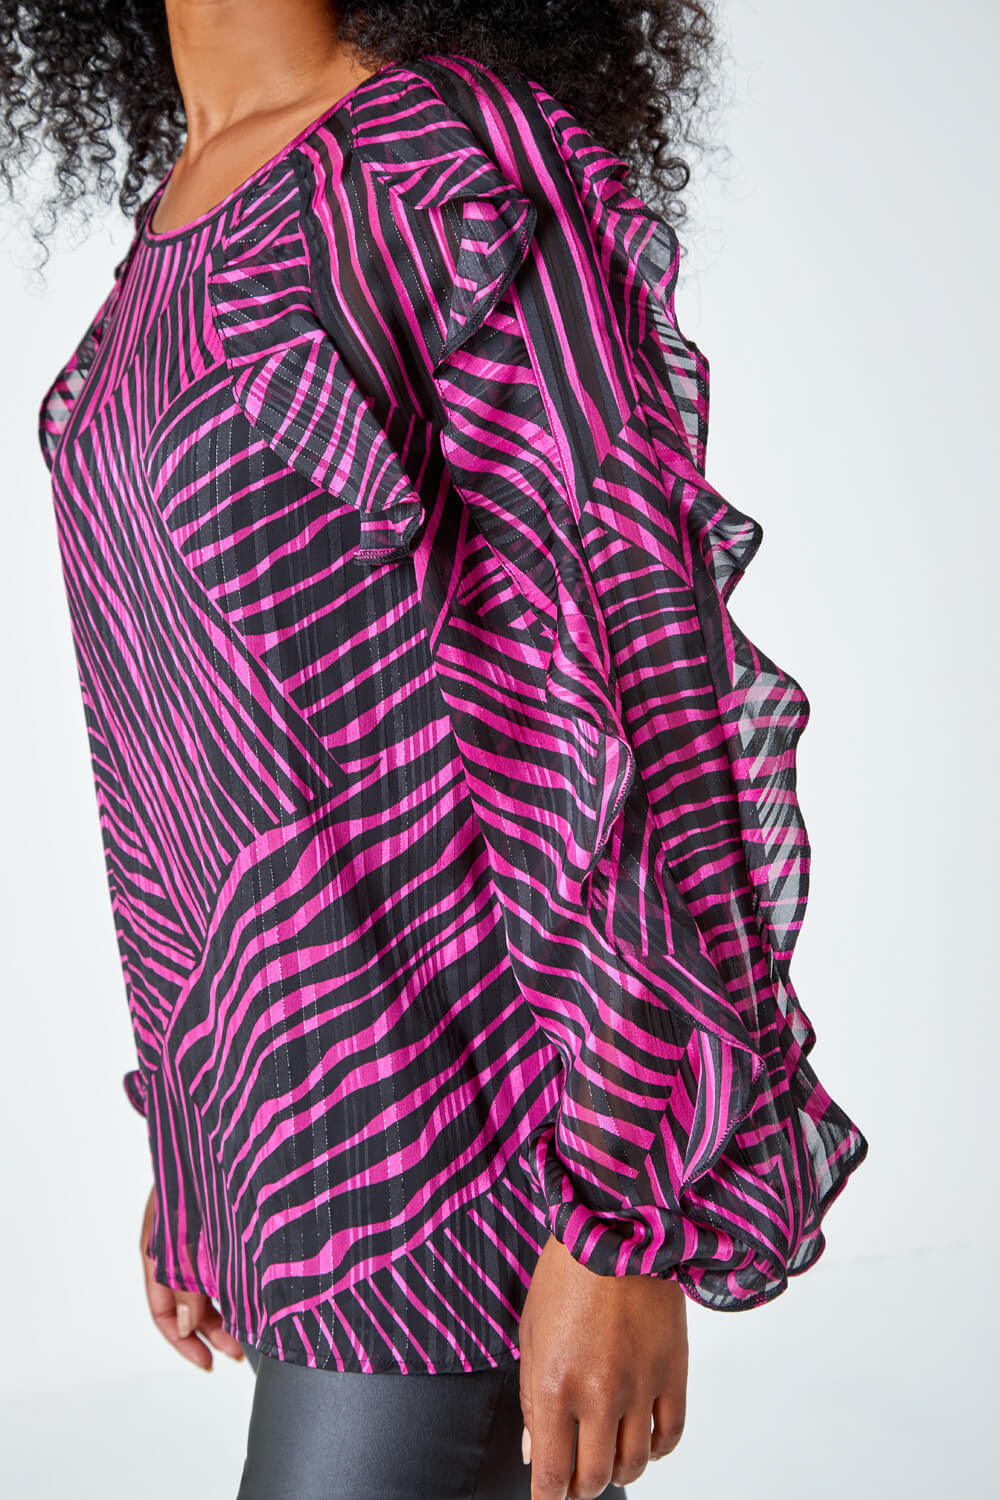 PINK Petite Abstract Print Frill Detail Top, Image 5 of 5